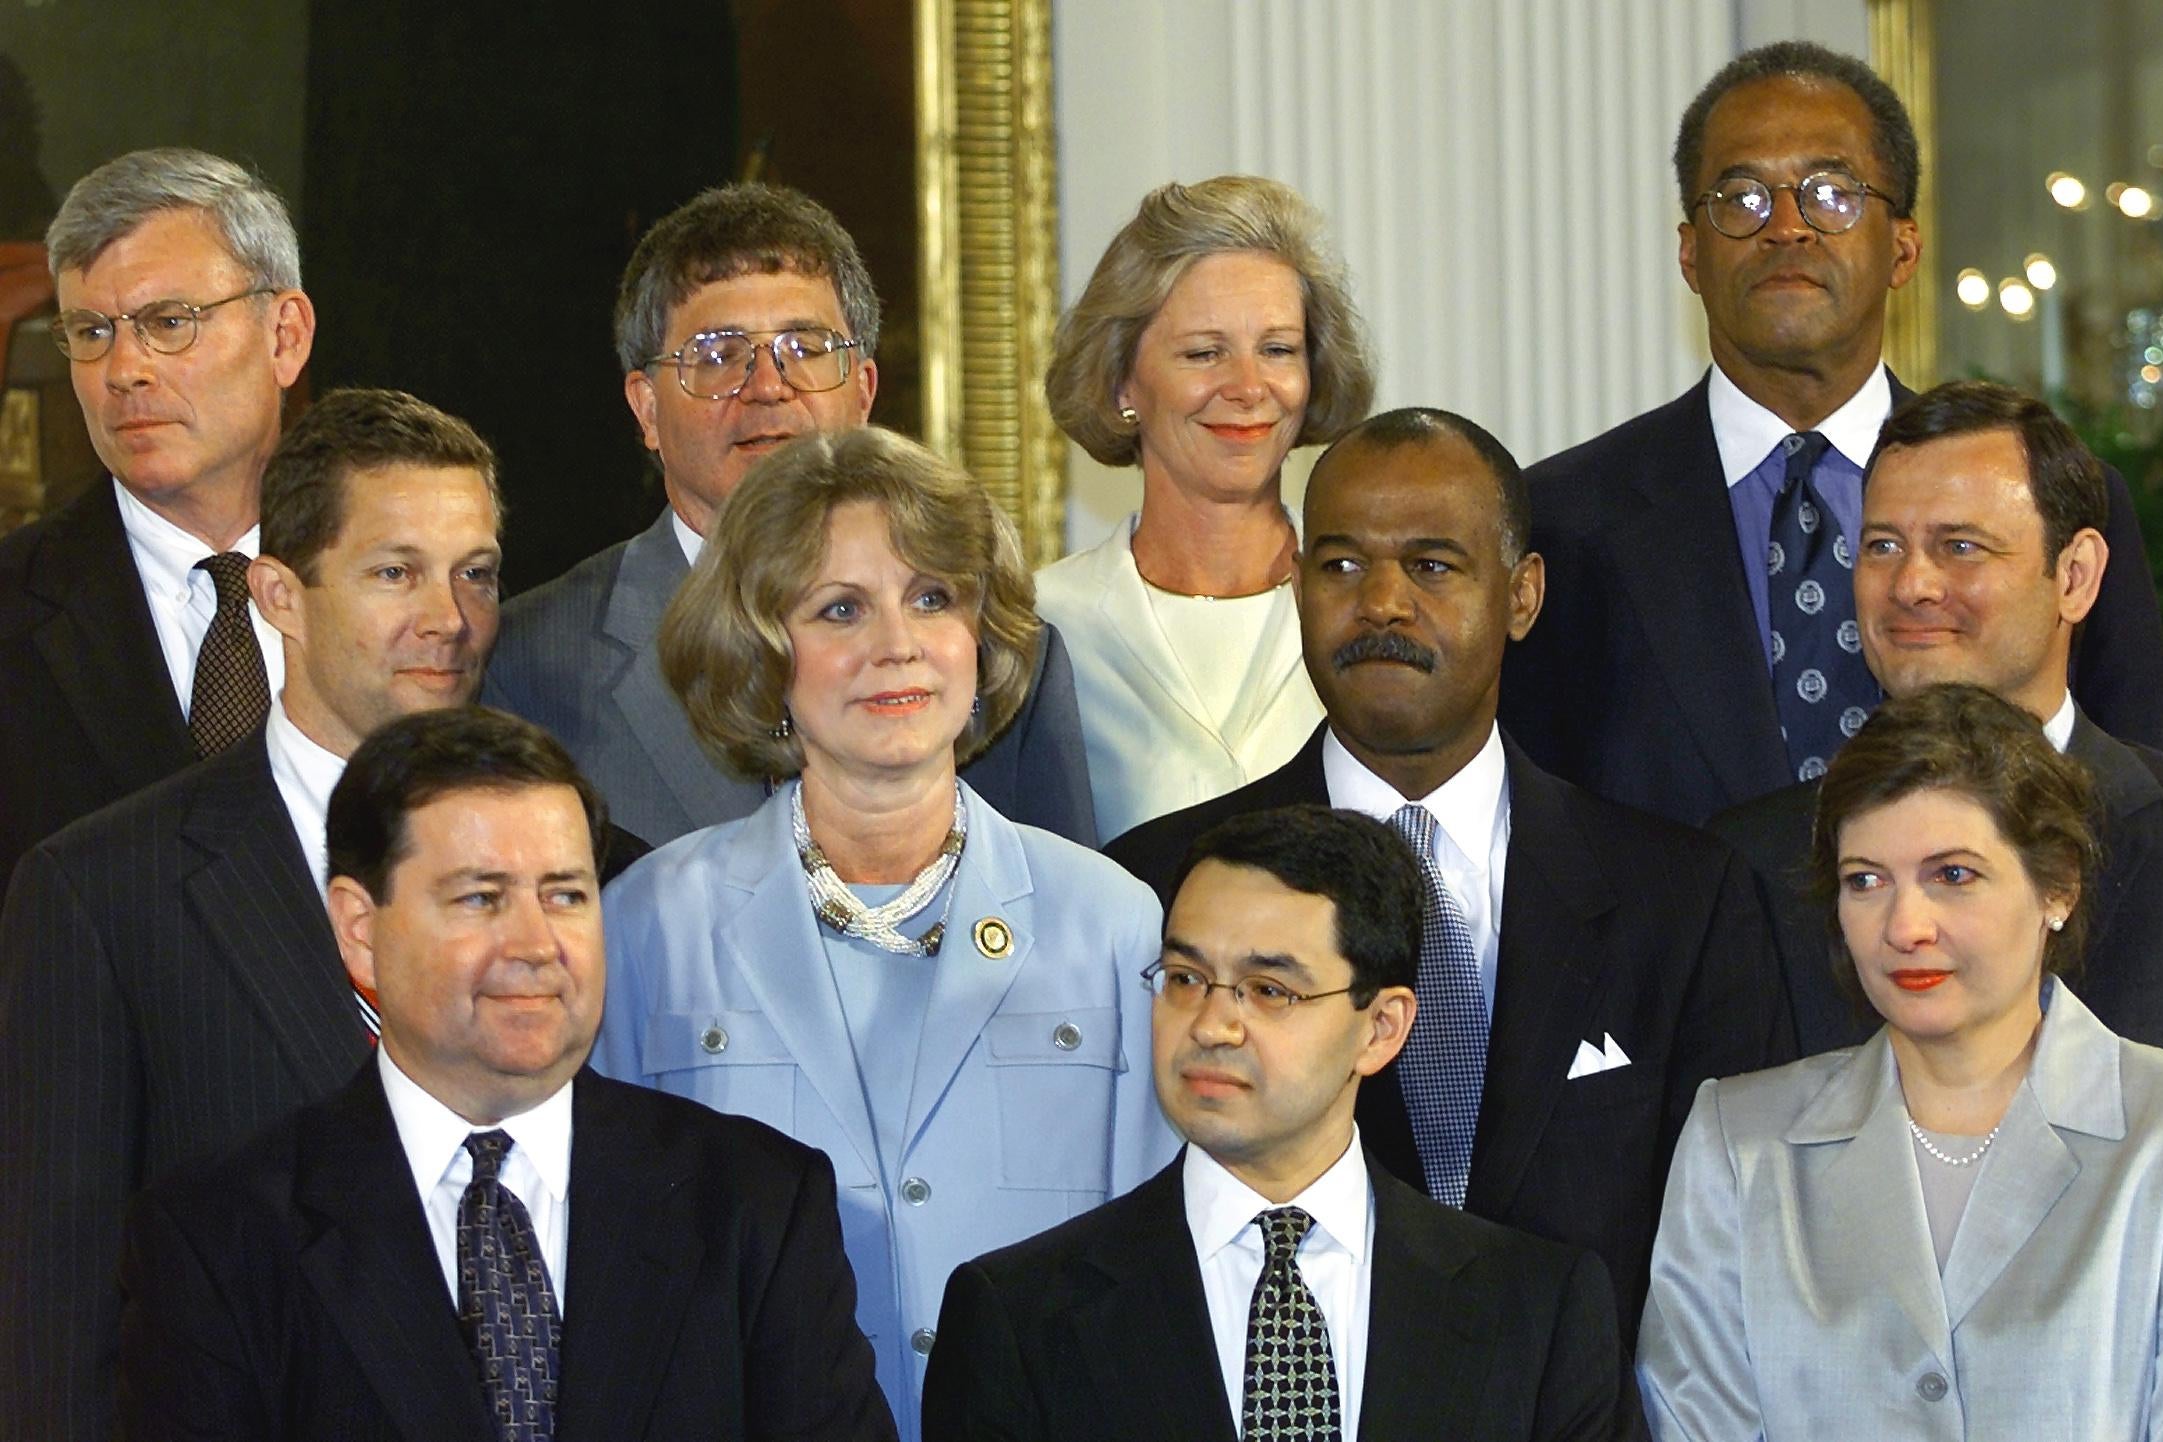 Judge Edith Brown Clement (middle row, second from the left). Spot a young John Roberts on the right.